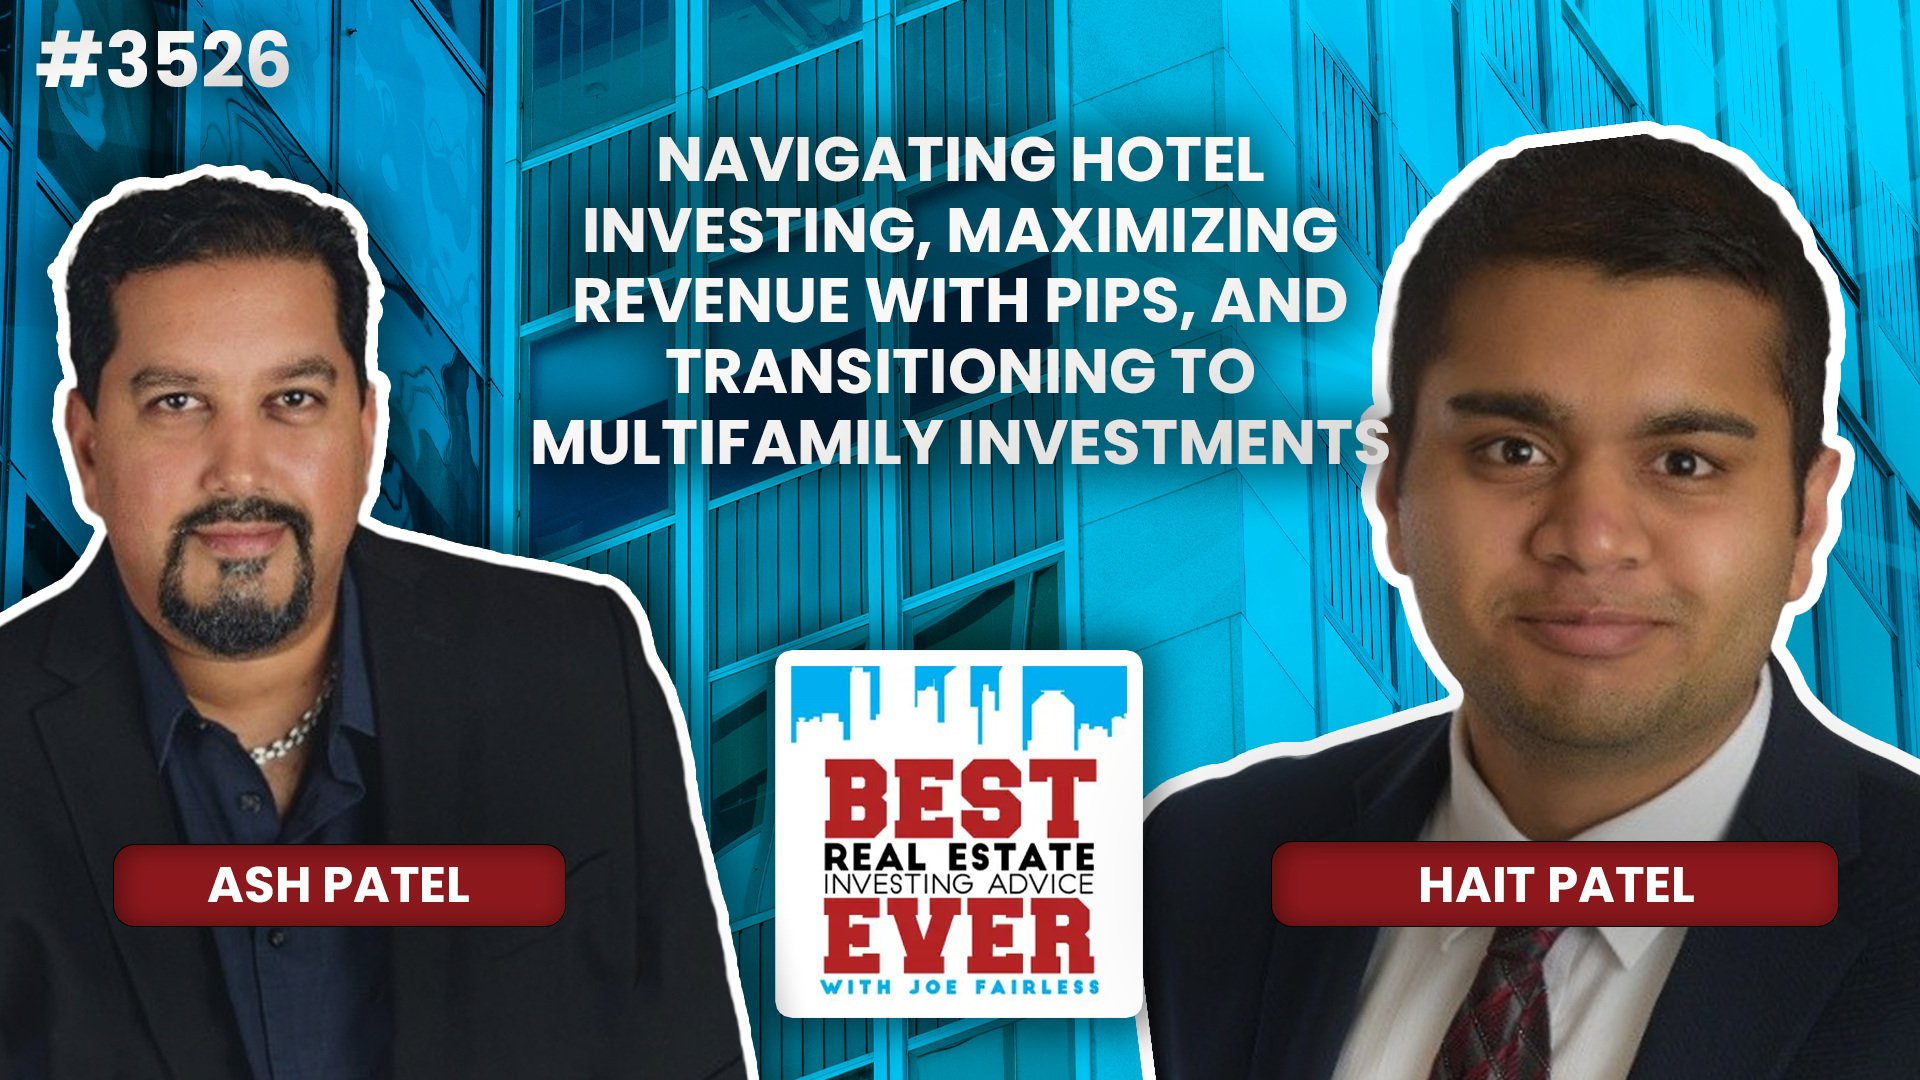 JF3526: Navigating Hotel Investing, Maximizing Revenue with PIPs, and Transitioning to Multifamily Investments ft. Hait Patel